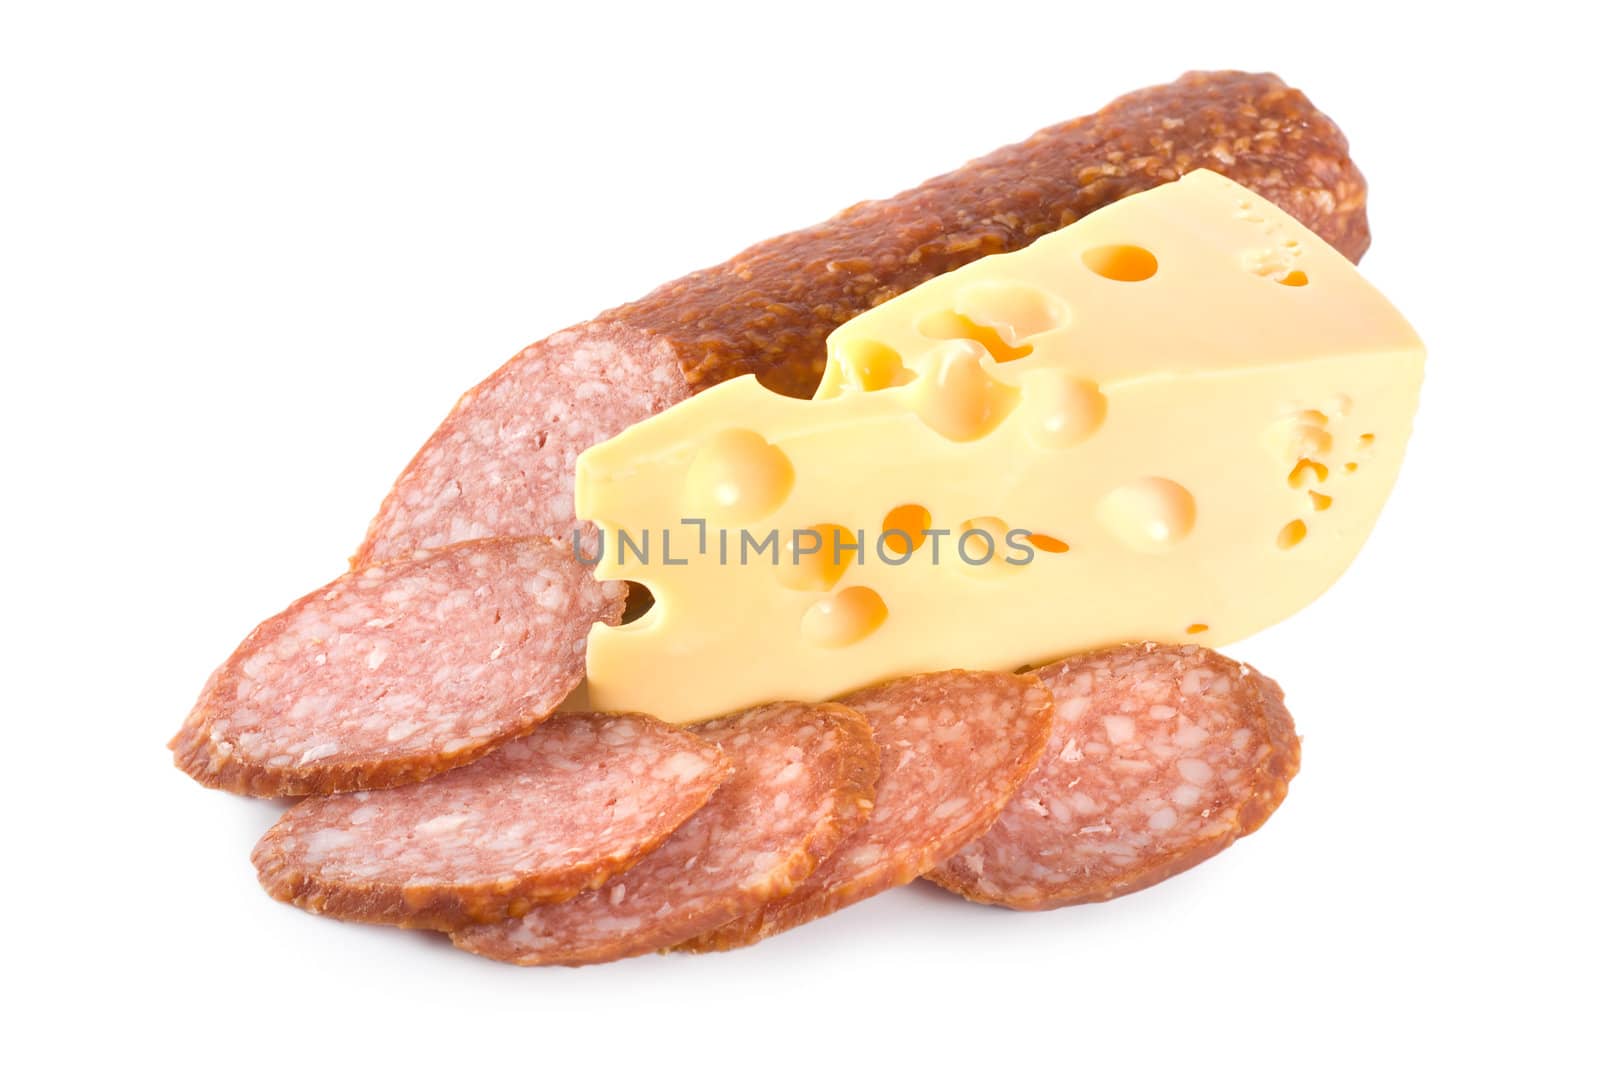 Cheese and Sausage by Givaga